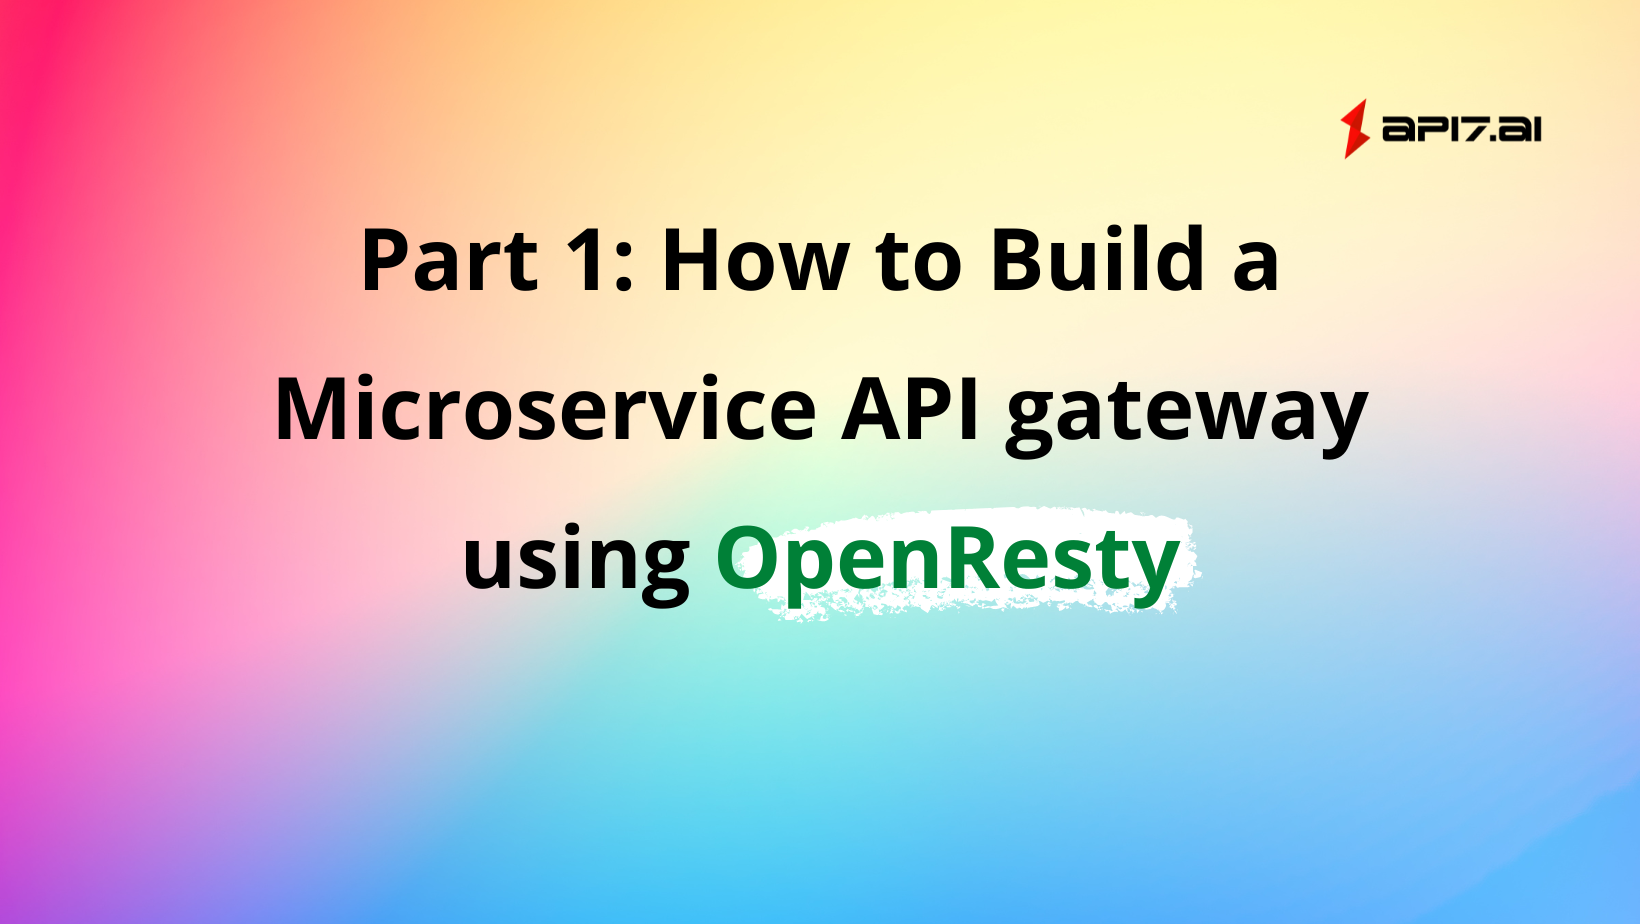 Part 1: How to Build a Microservice API gateway using OpenResty